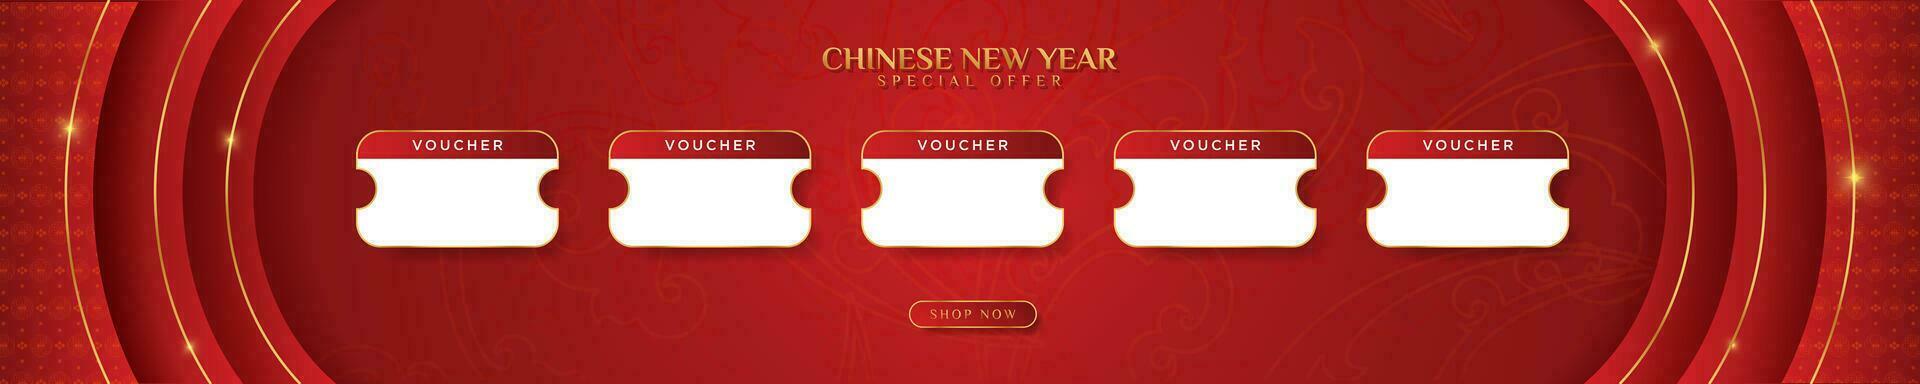 Set of Blank Chinese New Year Discount Voucher templates banner with oriental pattern design elements on red gradient background, shop now CTA button. Vector Illustration. EPS 10